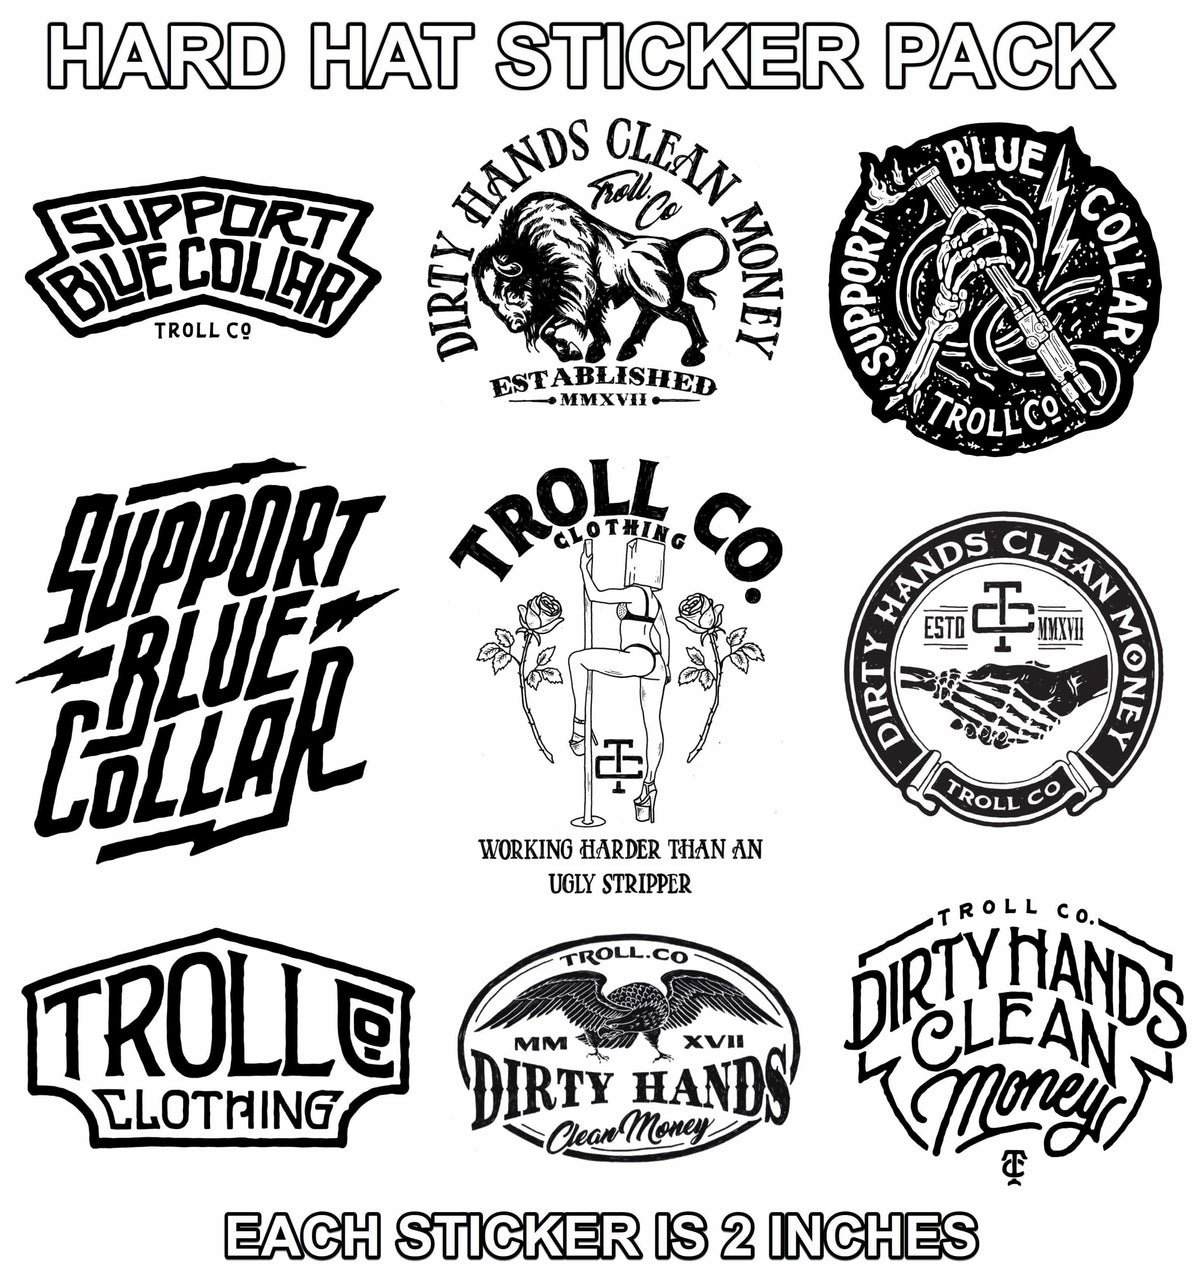 Only Blue Collar - Hard Hat Decal